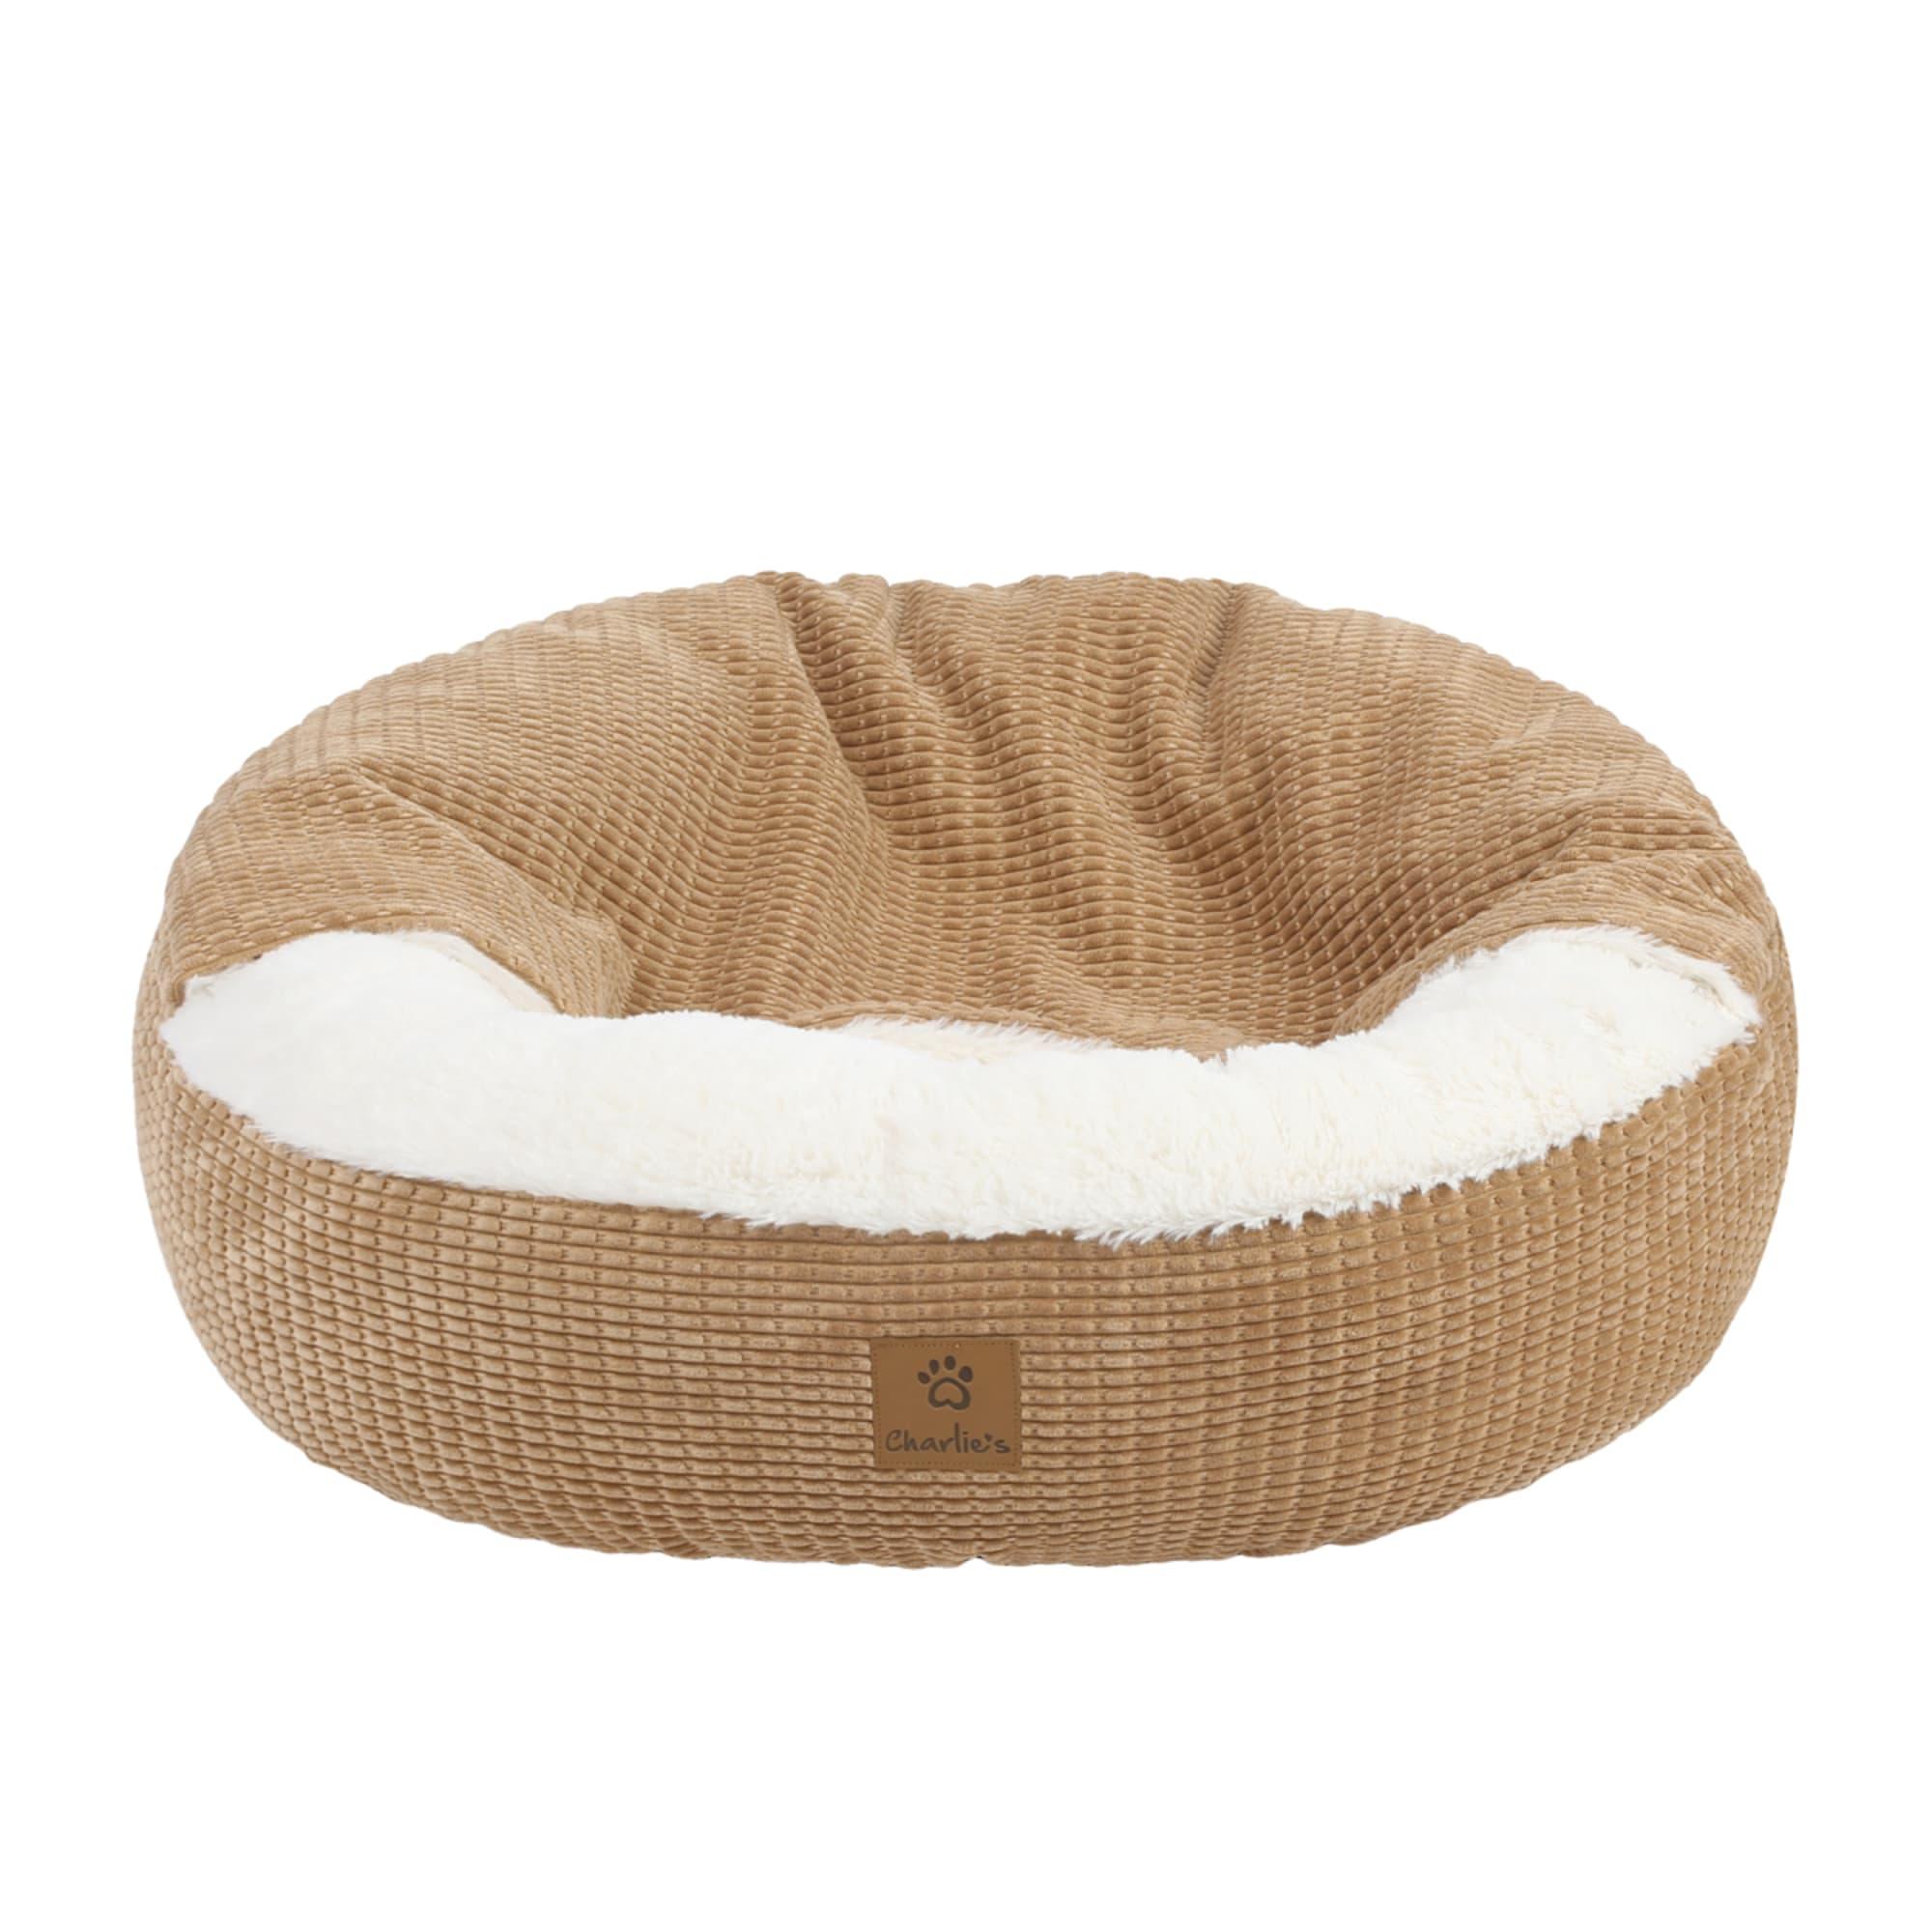 Charlie's Snookie Hooded Calming Dog Bed Small Iced Coffee Brown Image 1